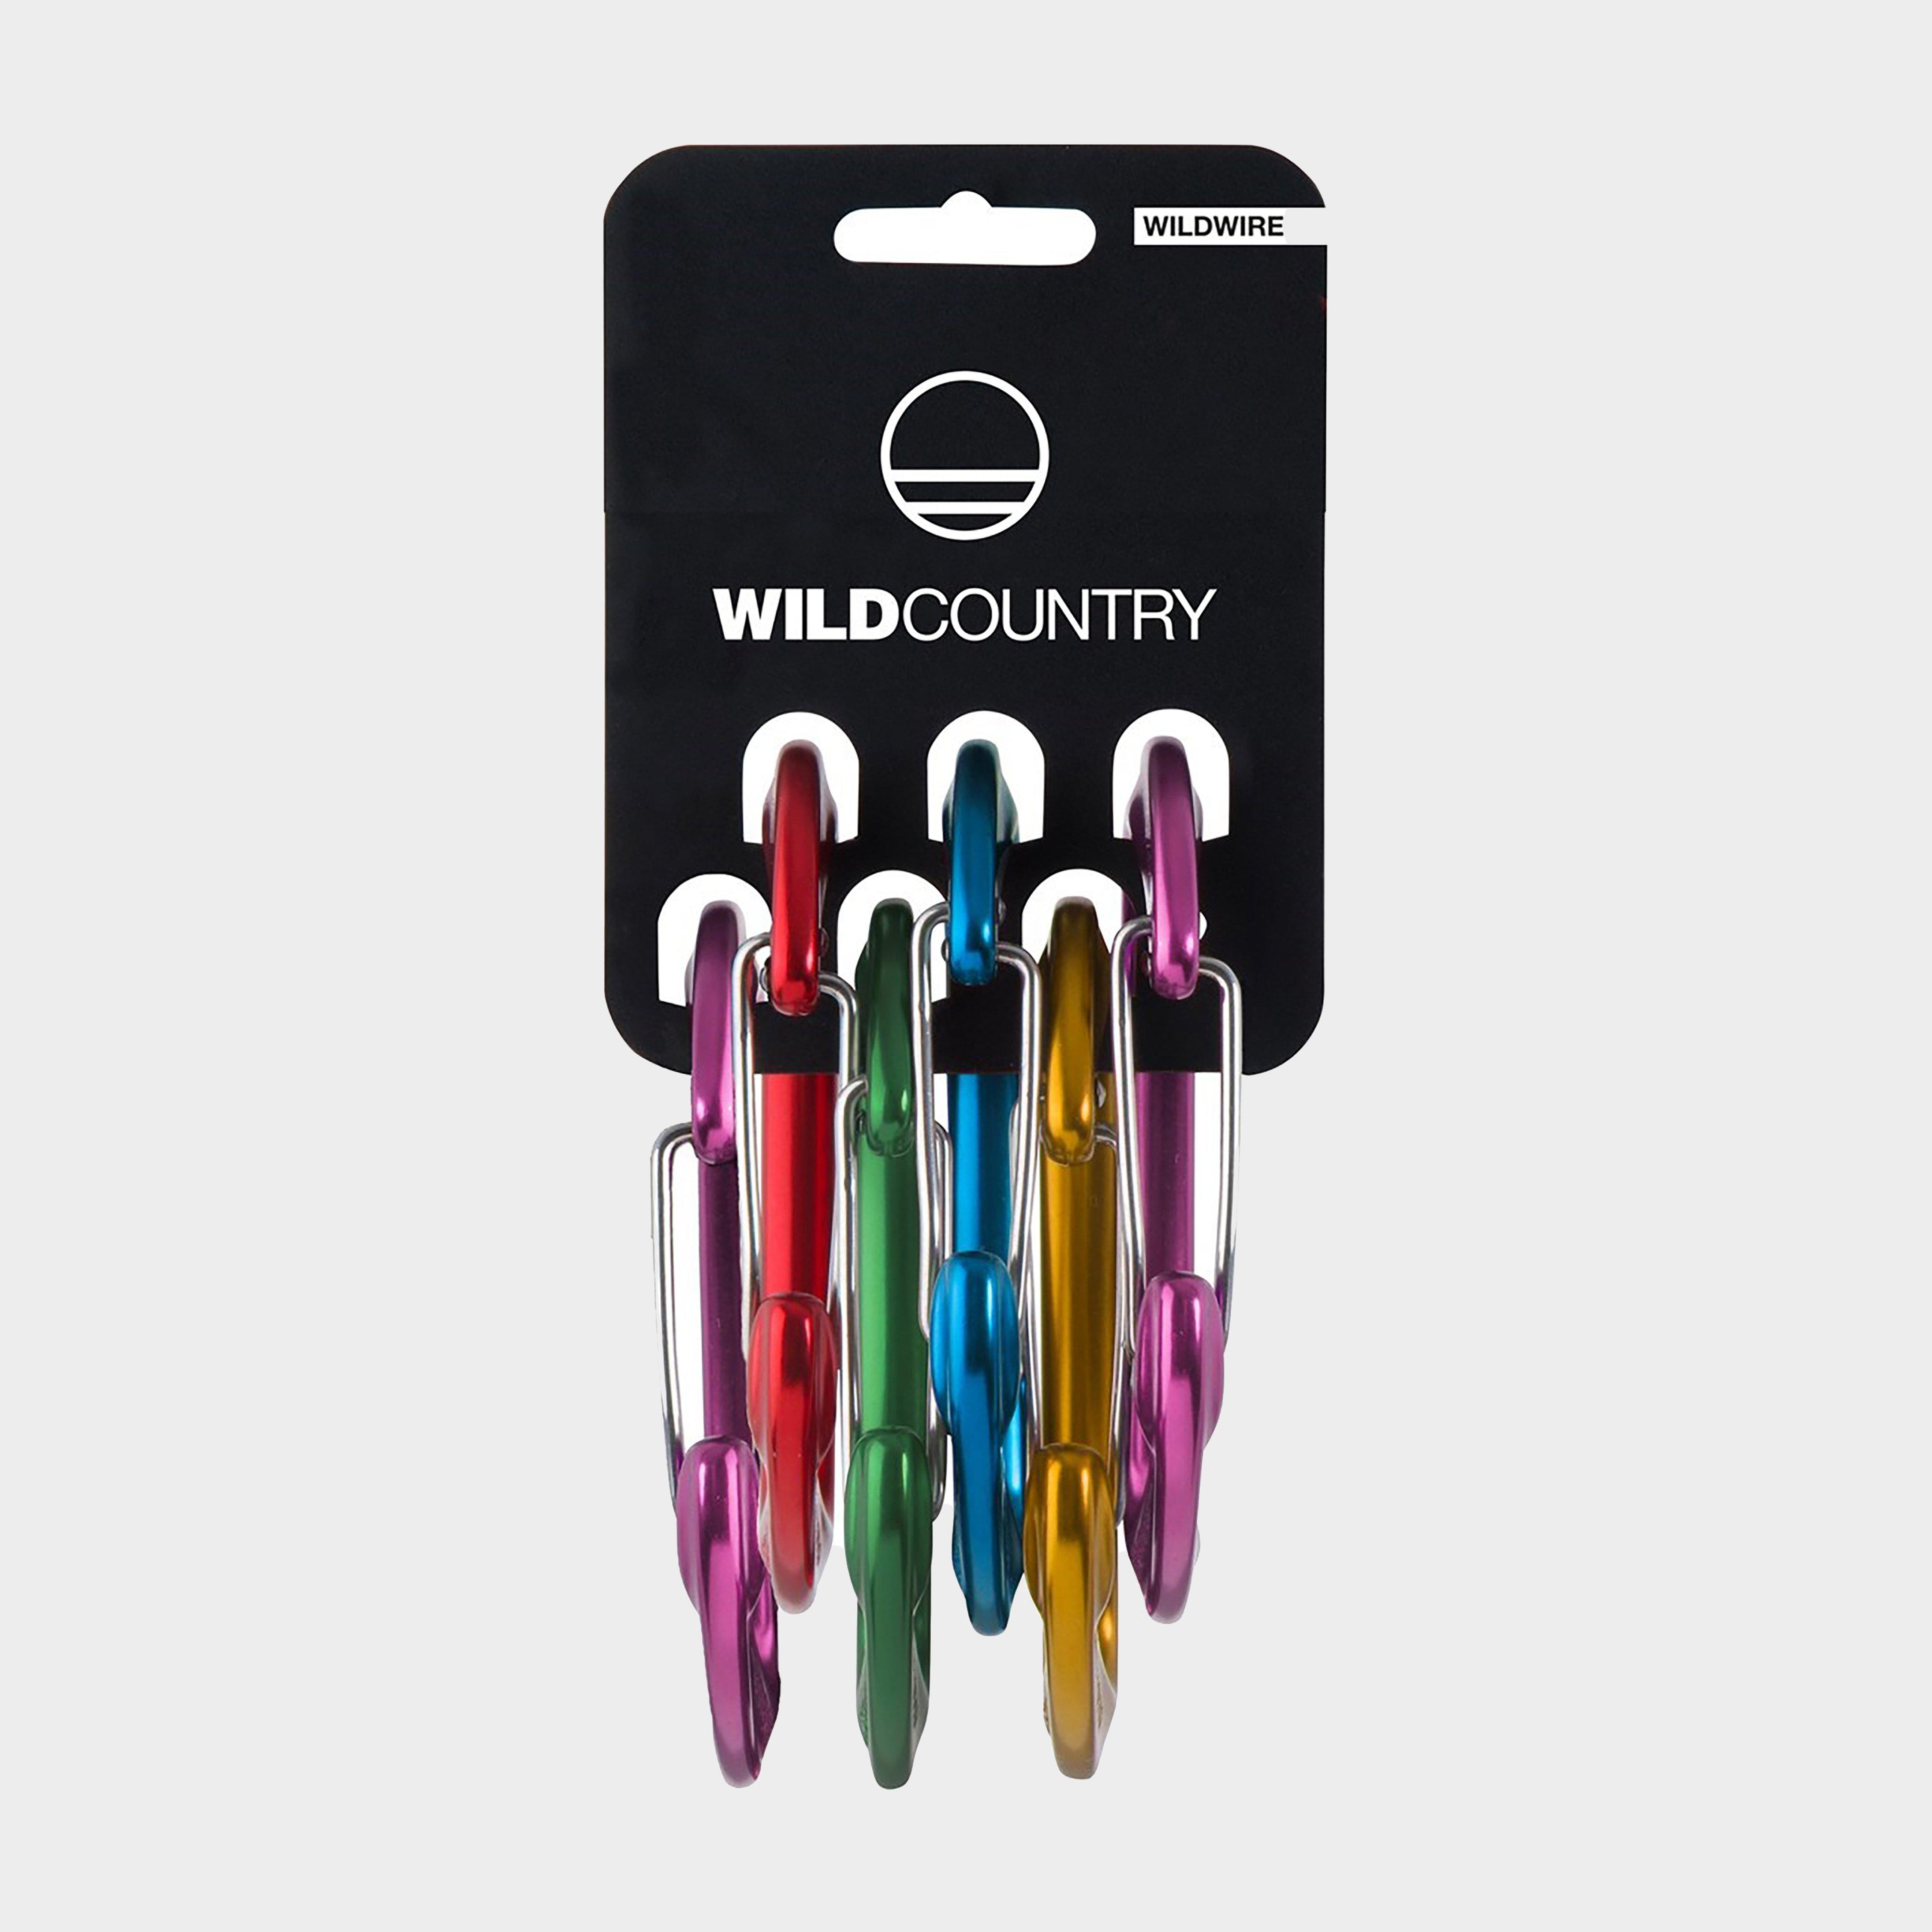 Wild Country Wild Country Wildwire Carabiner Rack 6 Pack - Multi, Multi